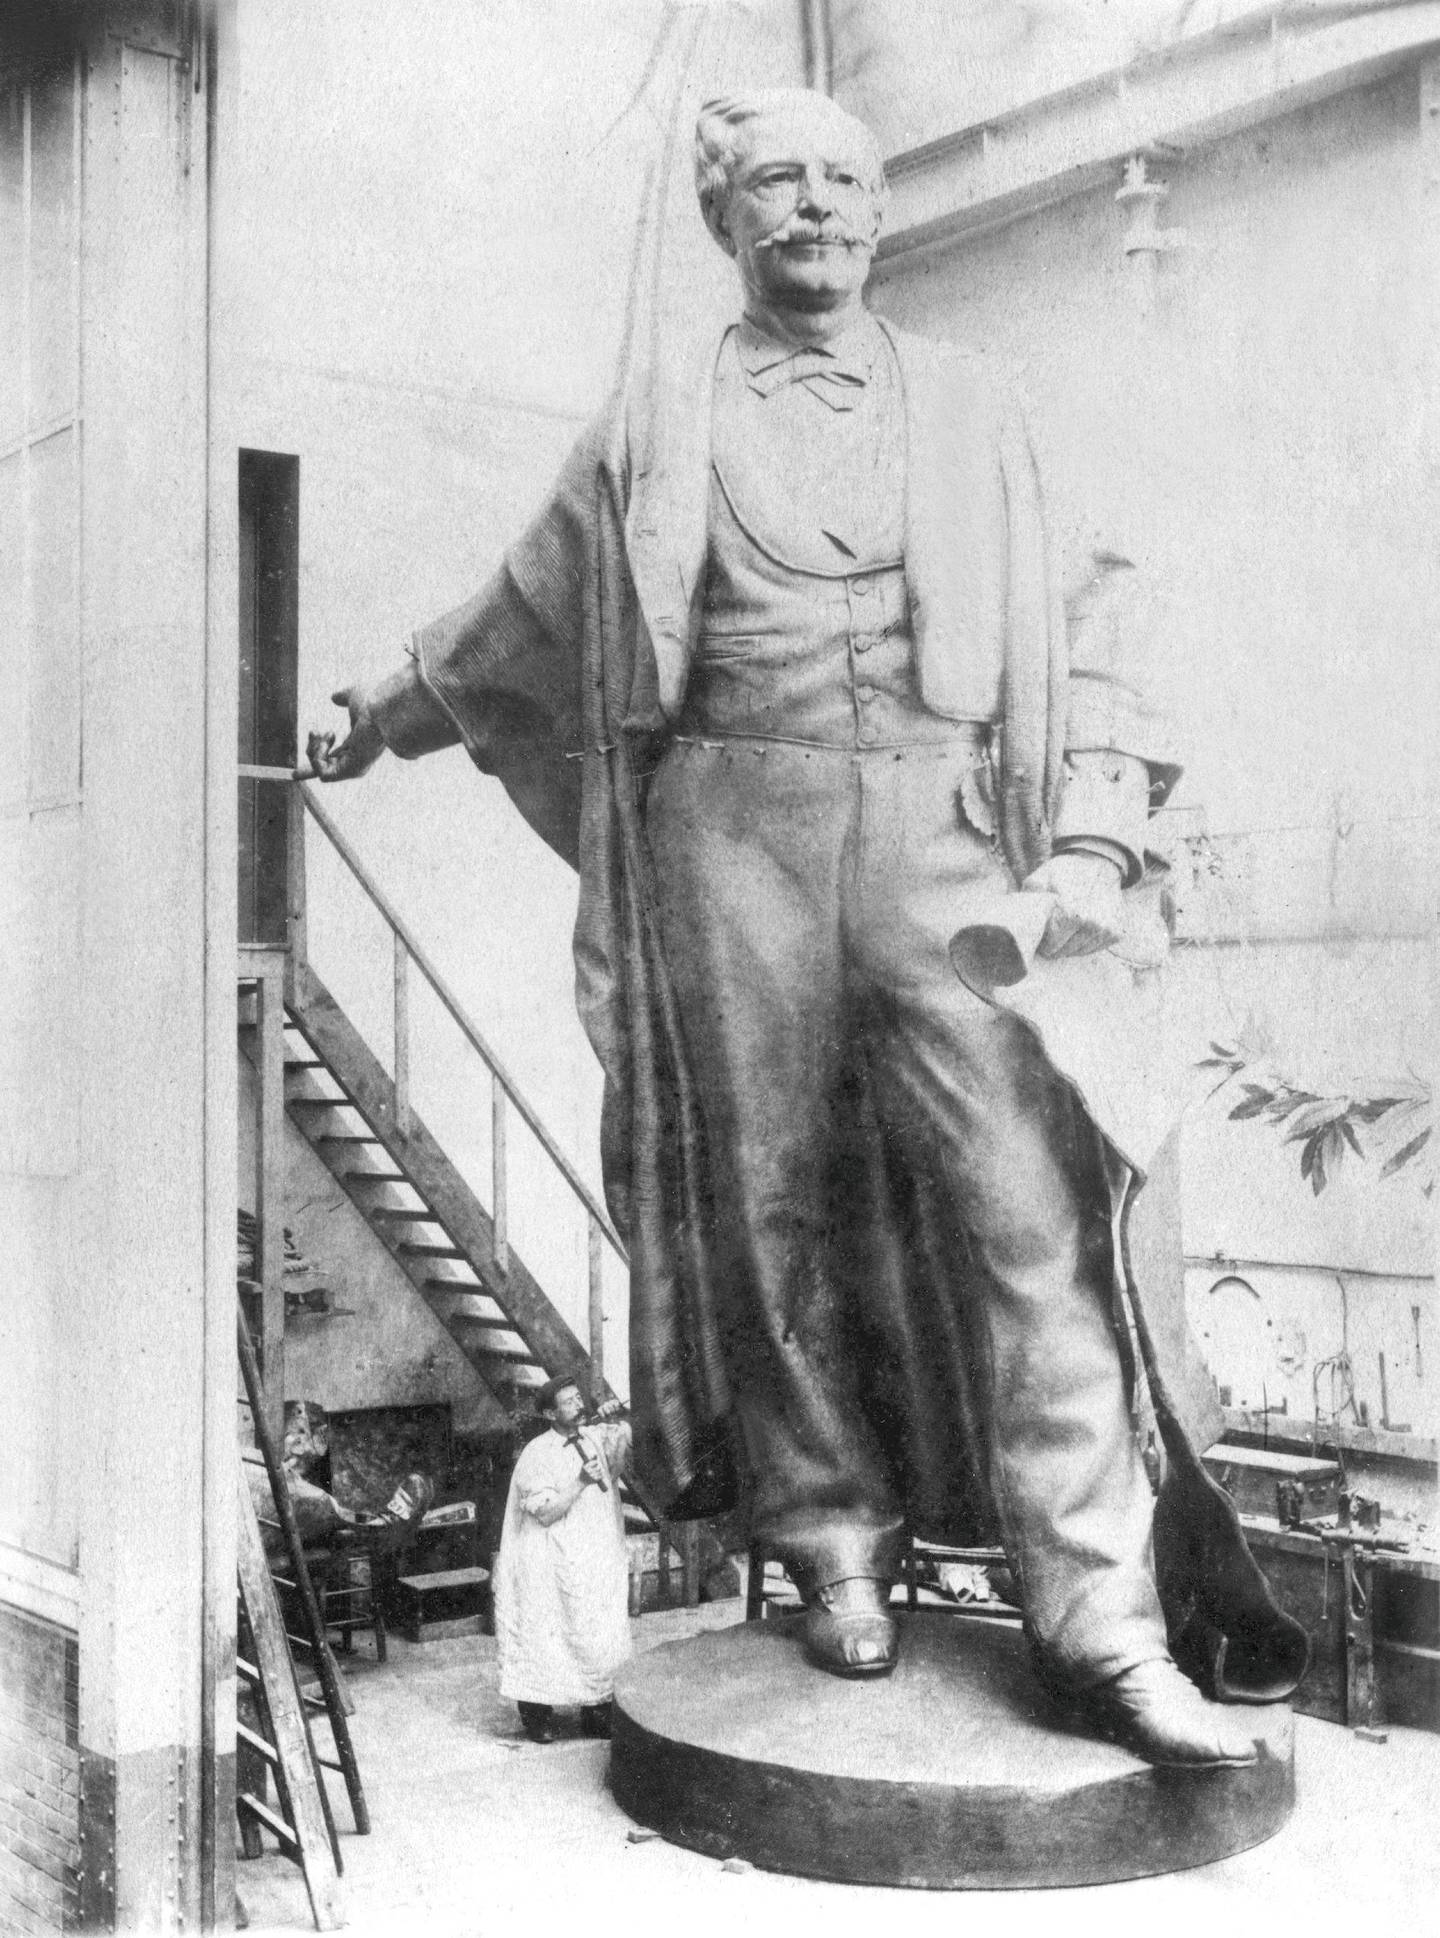 UNSPECIFIED - NOVEMBER 09:  Statue of Ferdinand de Lesseps (1805-1894) in workshop of Emmanuel Fremiet, statue will be erected in Port Said on november 17, 1899  (Photo by Apic/Getty Images)